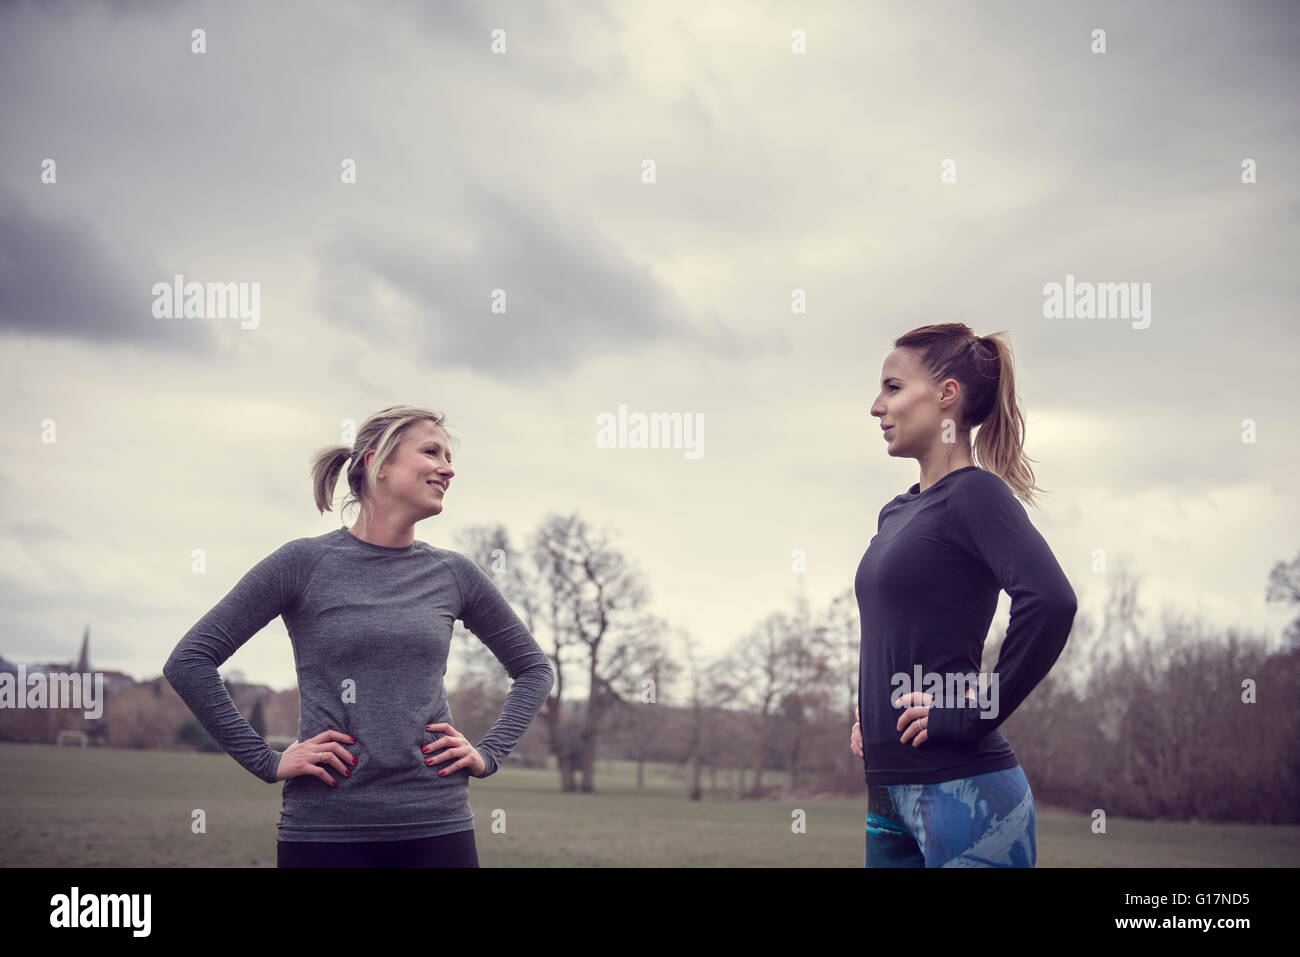 Women wearing sports clothes in field hands on hips face to face smiling Stock Photo